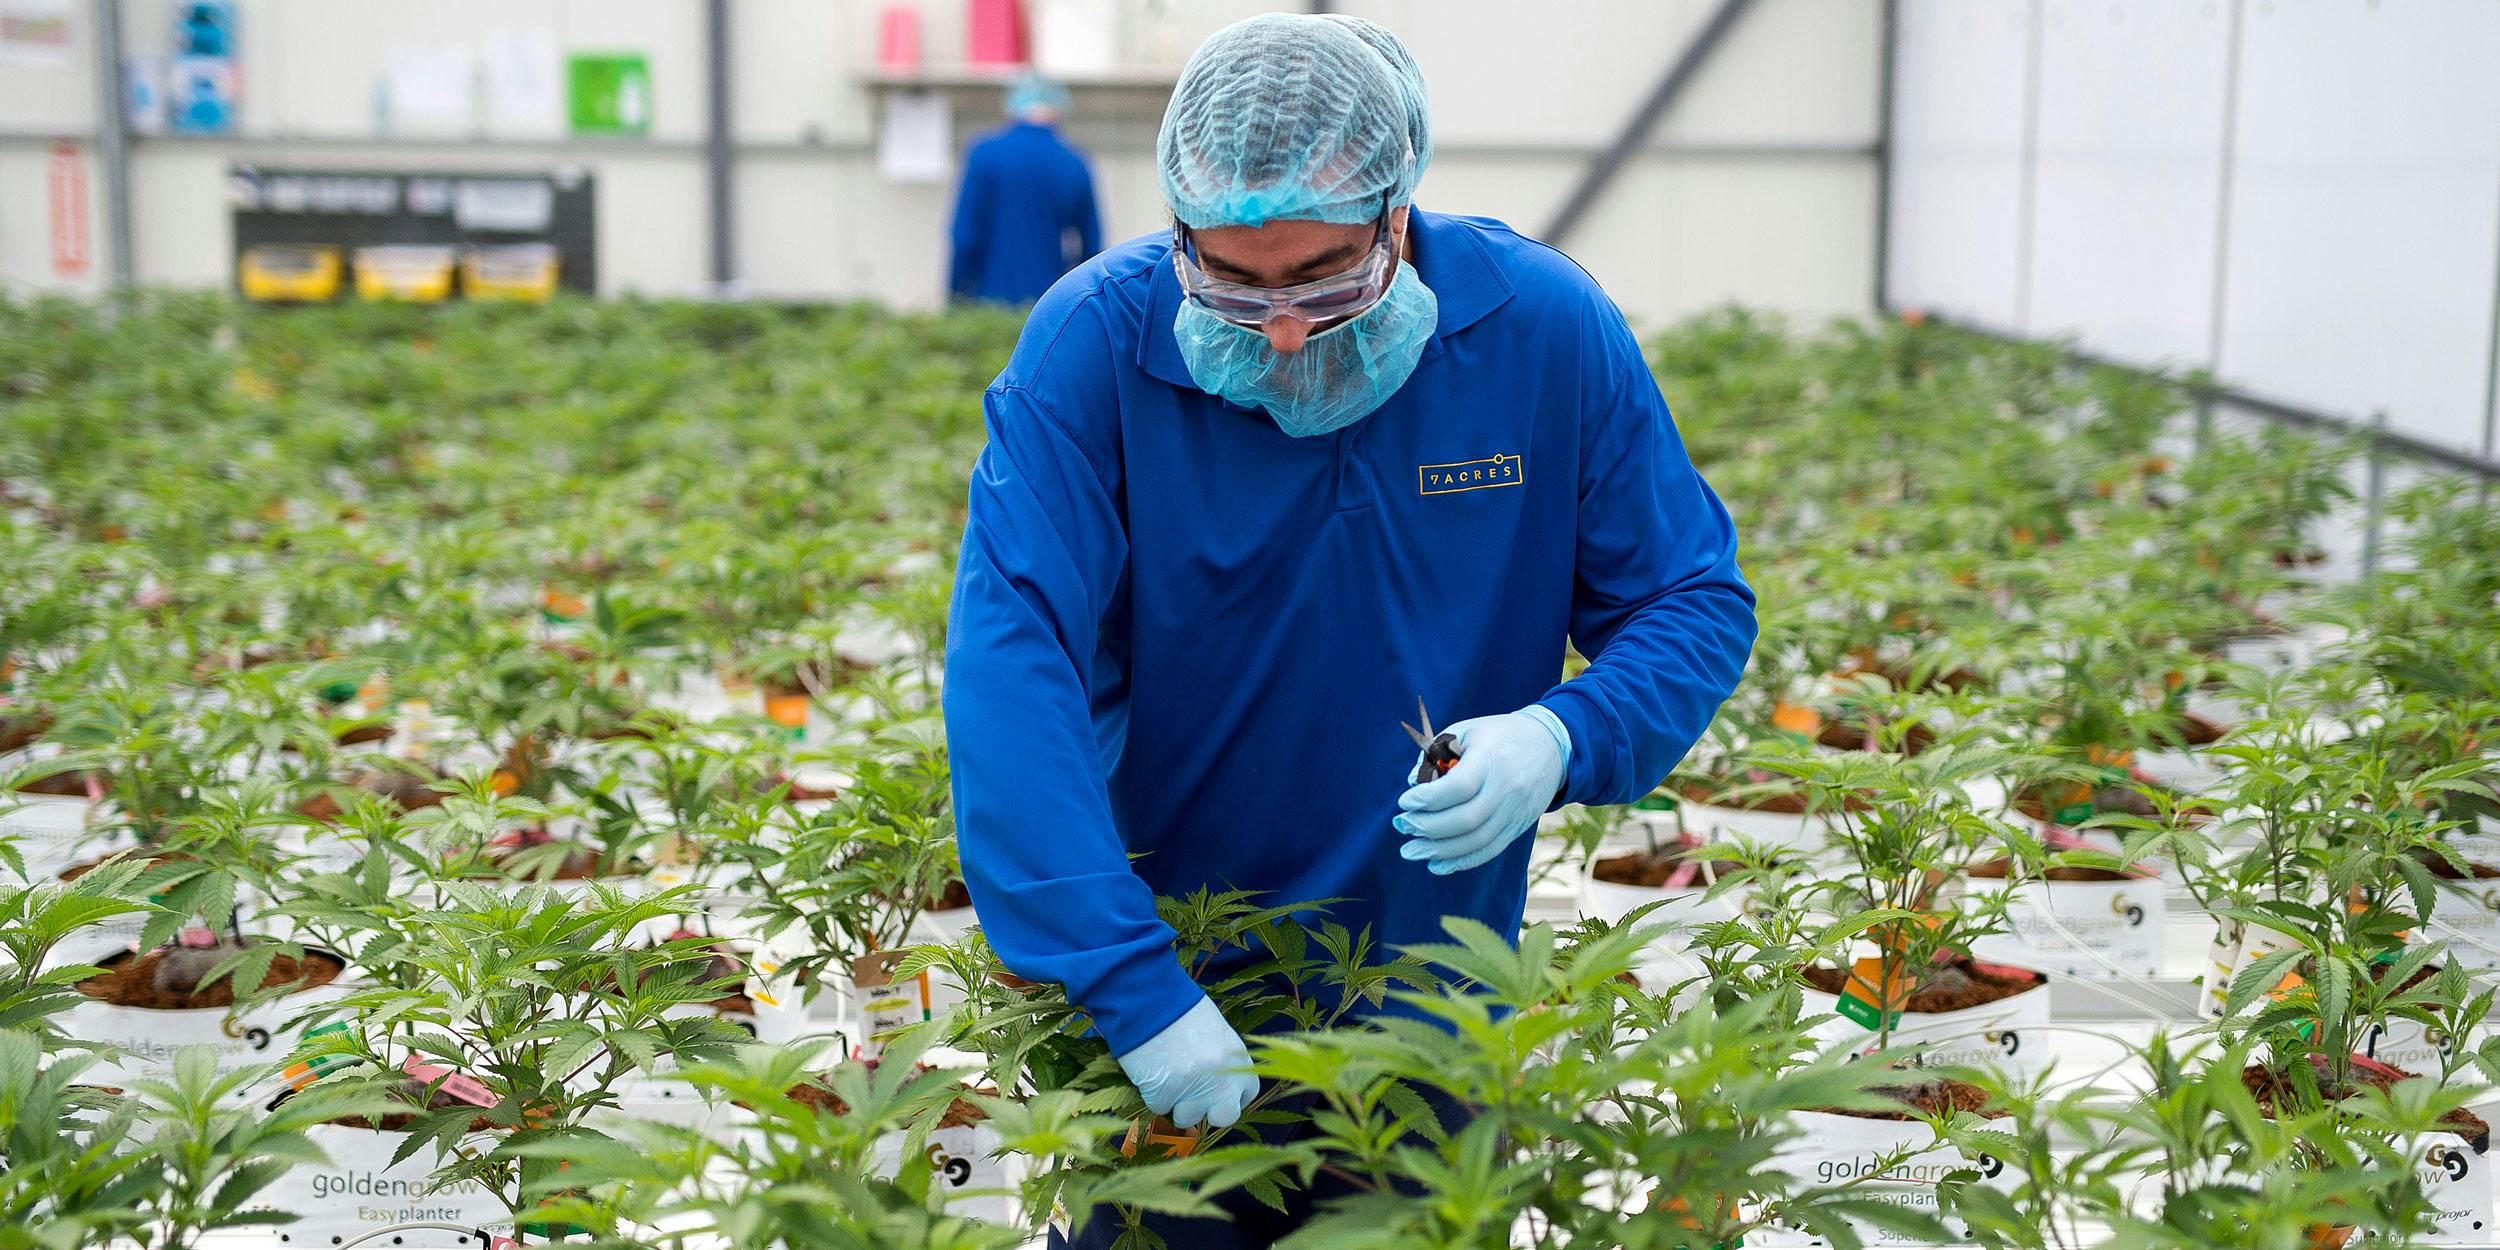 An employee trims cannabis plants in a greenhouse at the 7ACRES facility in Tiverton, Ontario, Canada, on Tuesday, March 13, 2018. (Photo by James MacDonald/Bloomberg via Getty Images)